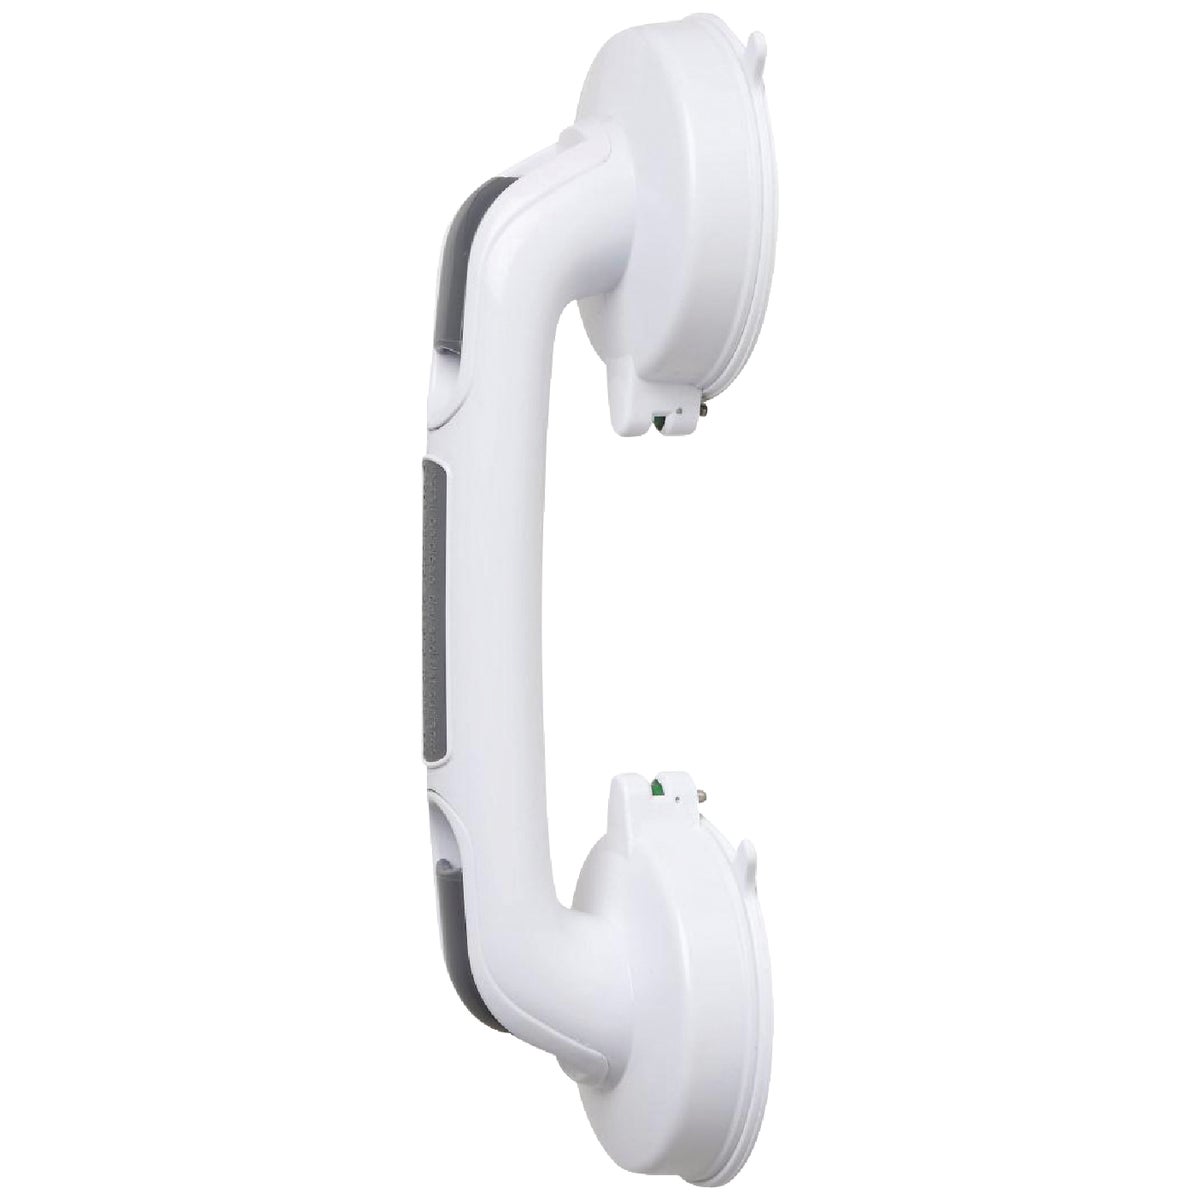 12″ SUCTION CUP GRAB BAR